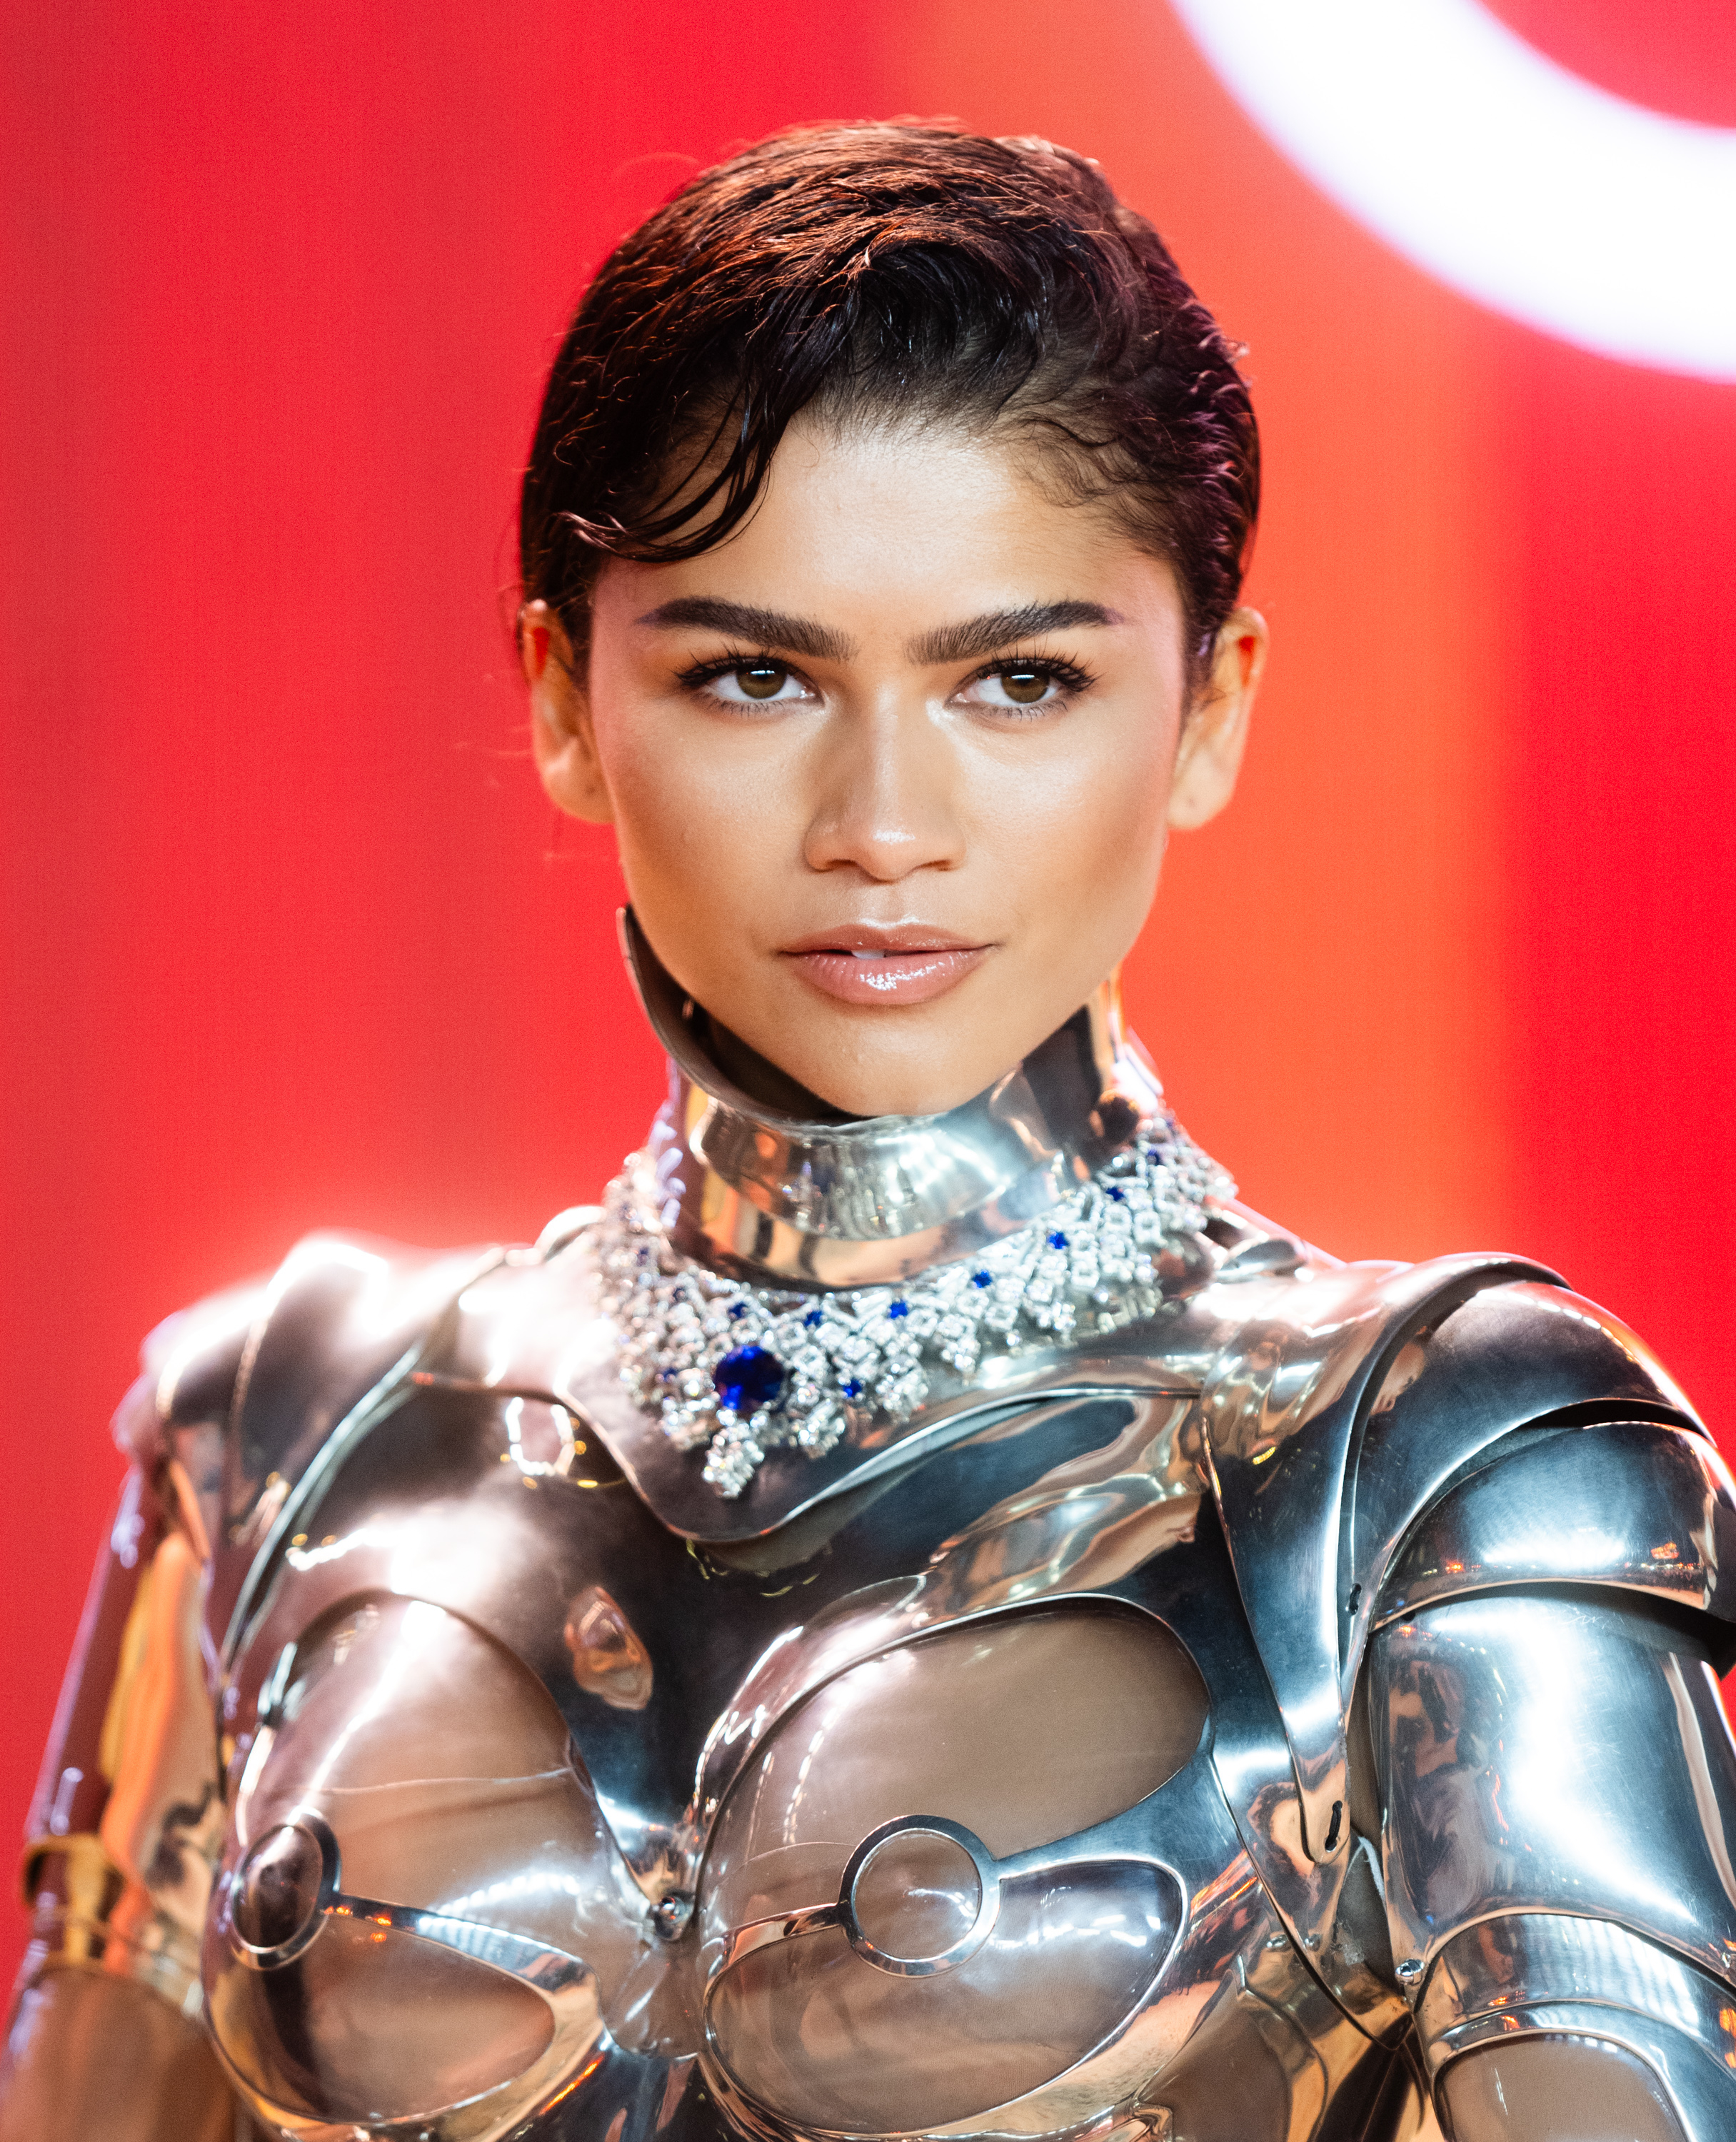 Zendaya in a metallic structured outfit with an embellished neckline